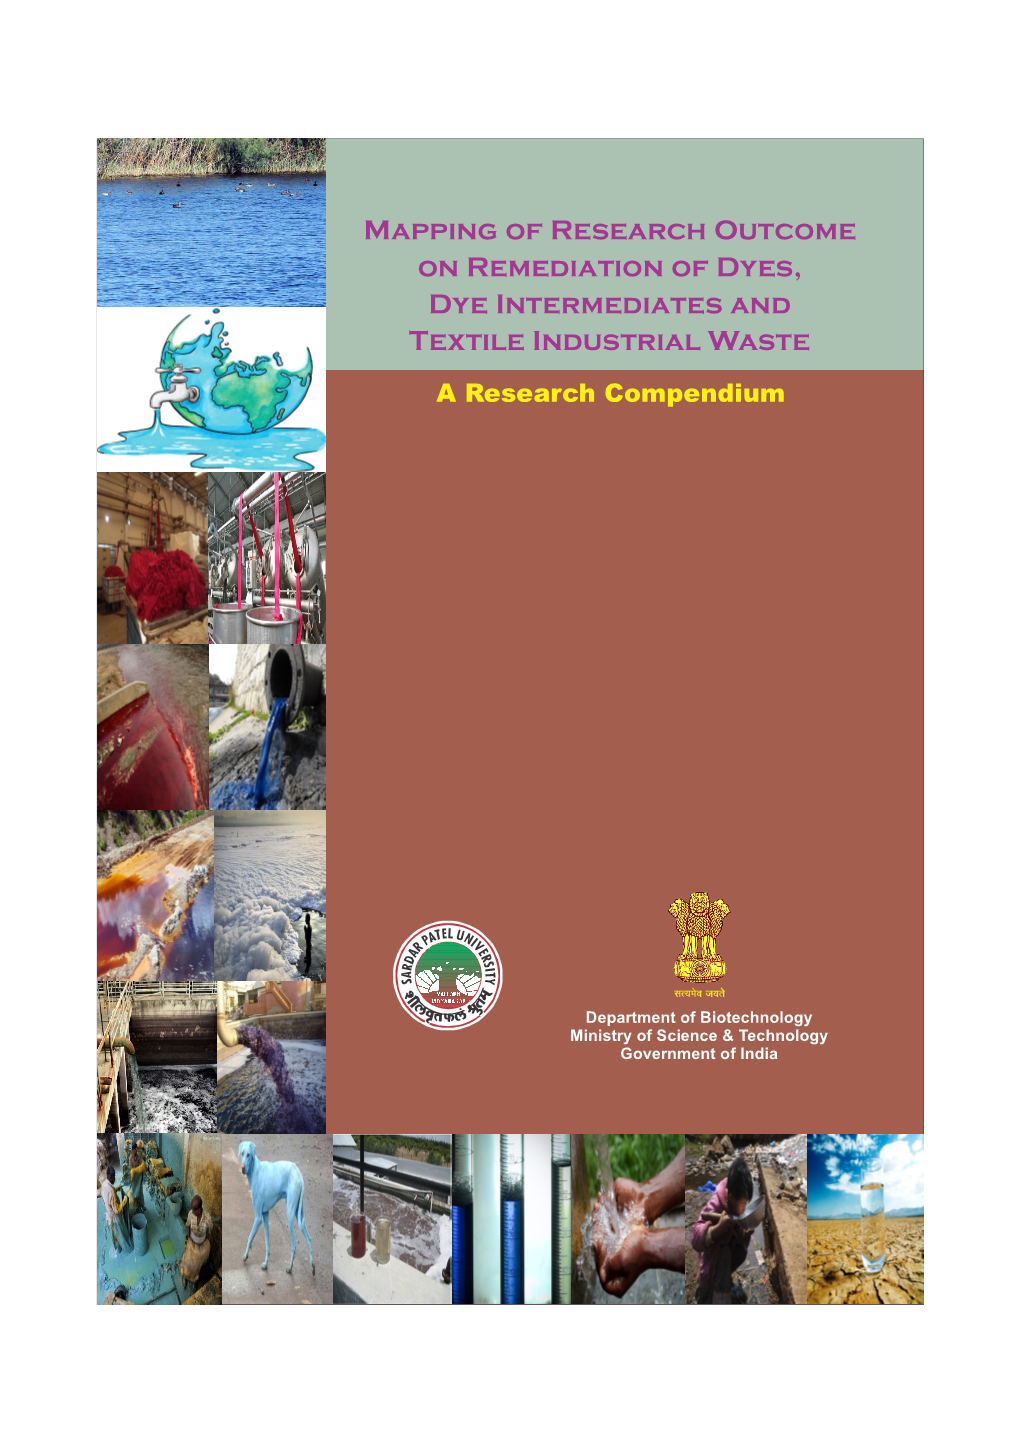 Mapping of Research Outcome on Remediation of Dyes, Dye Intermediates and Textile Industrial Waste a Research Compendium